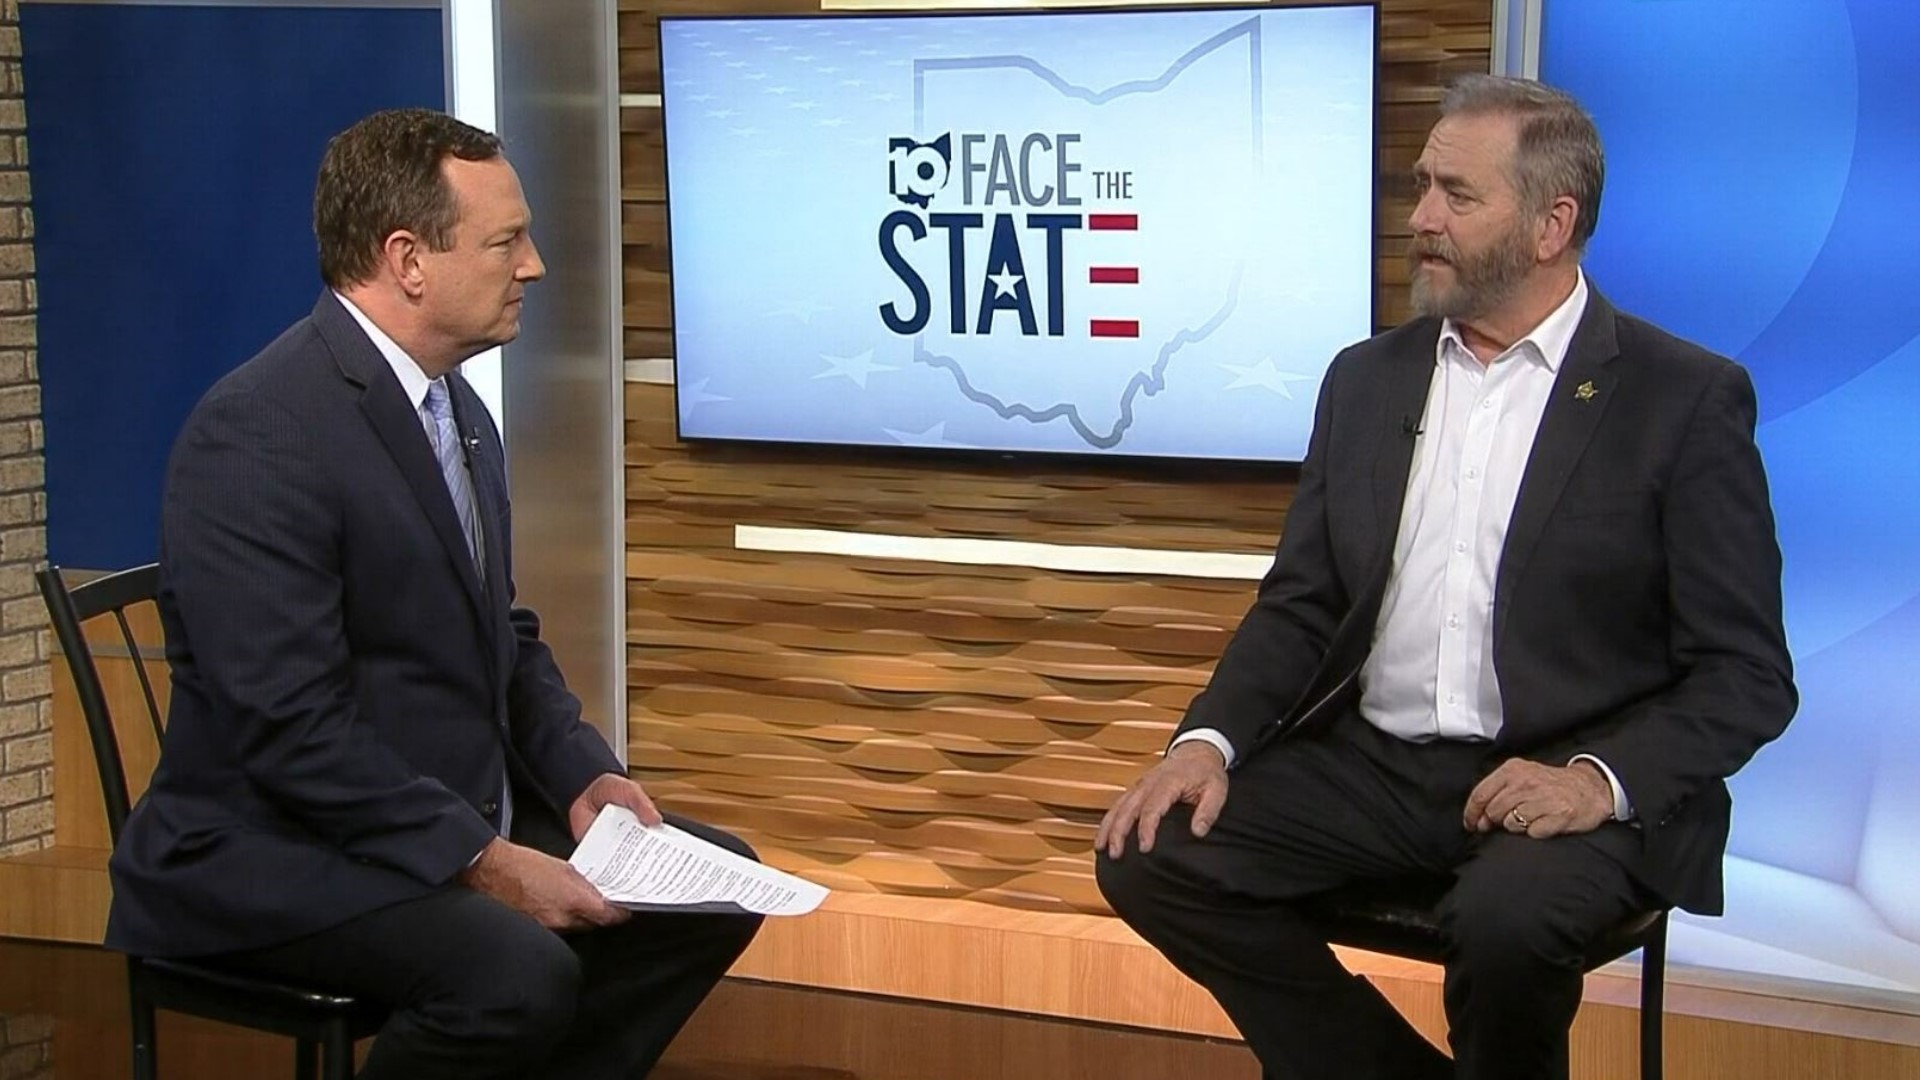 On this week's Face the State, 10TV's Doug Petcash sat down with Ohio Attorney General Dave Yost, State Senator Michael Rulli and CML CEO Pat Lewinski